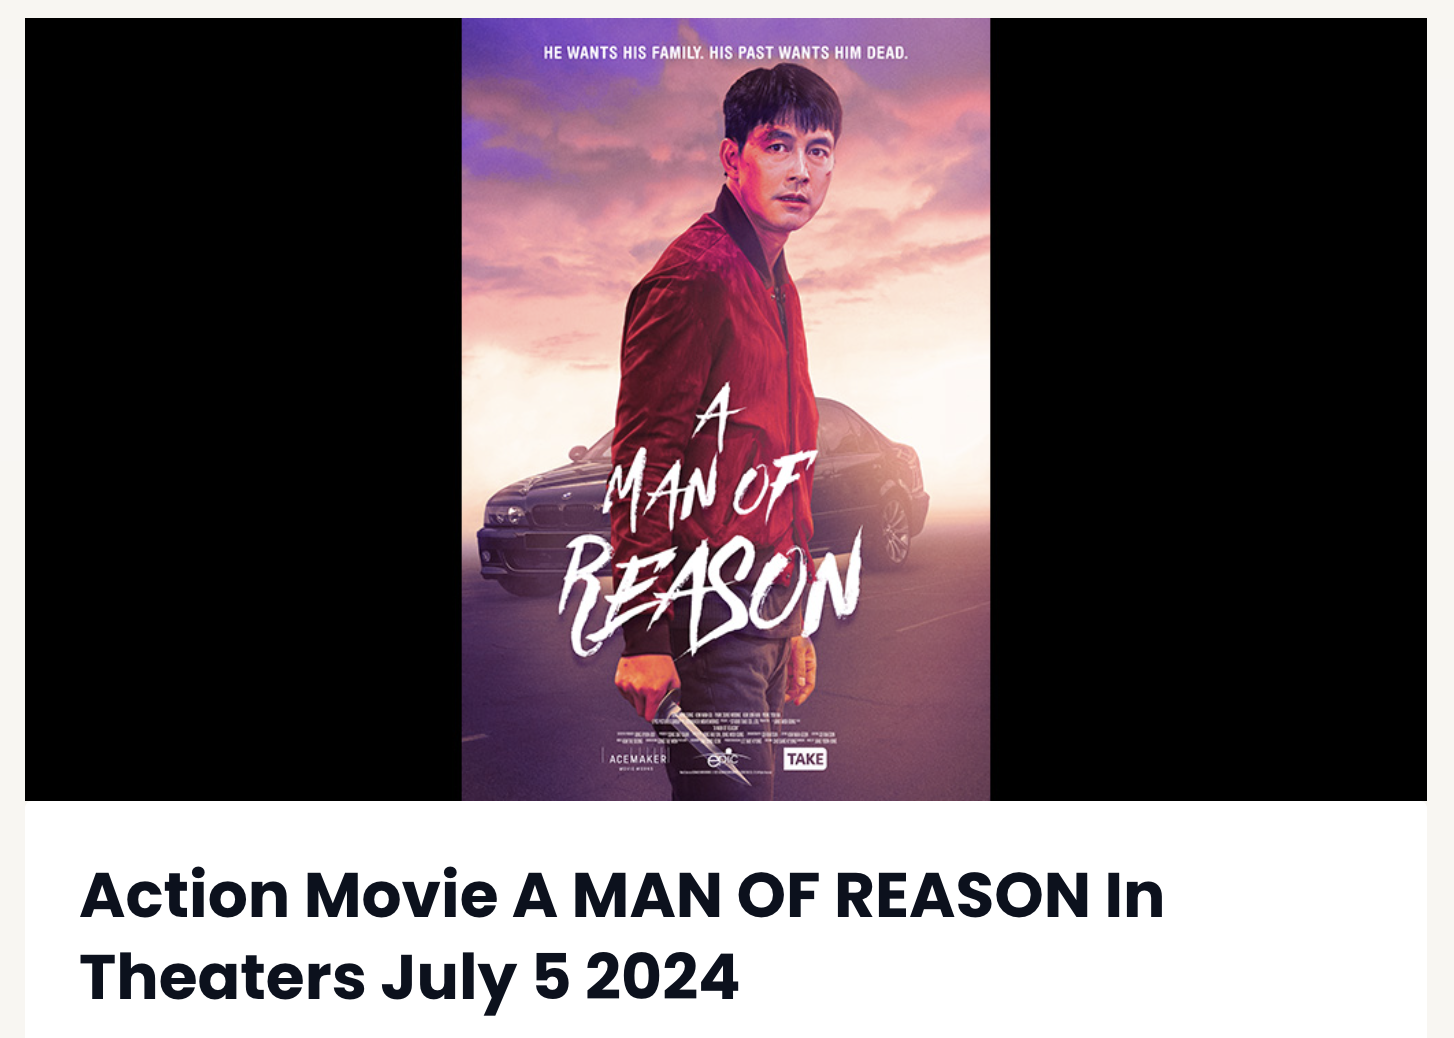 Action Movie A MAN OF REASON In Theaters July 5 2024